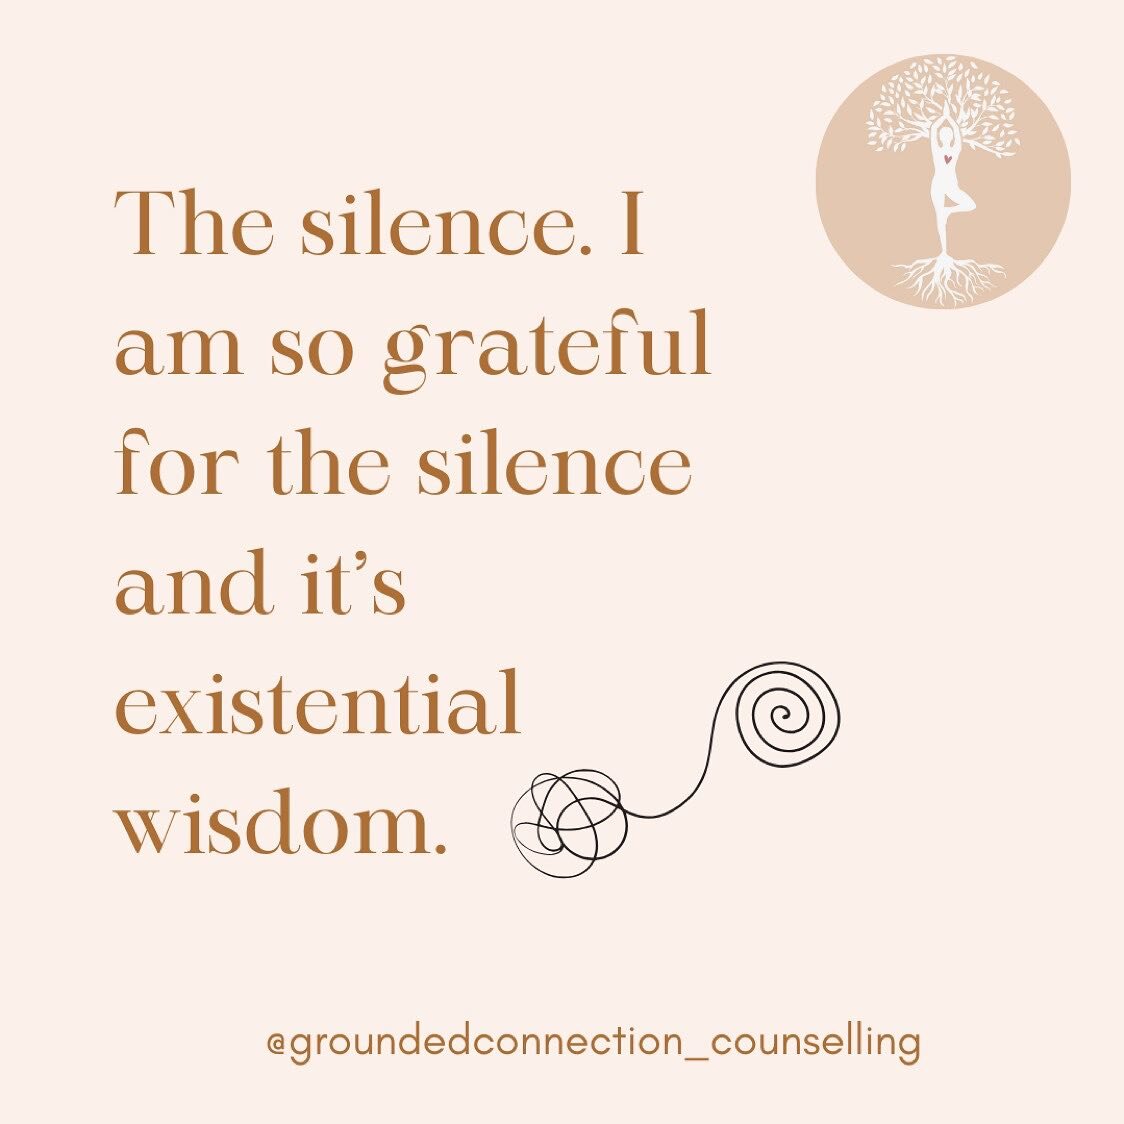 Today I had planned on attending a 10 day silent @vipassanaorg retreat but my dog has been unwell so I have decided not to go.

Instead I will be taking 10 days away from technology and spending some time in silence and meditating.

#silence #vipassa